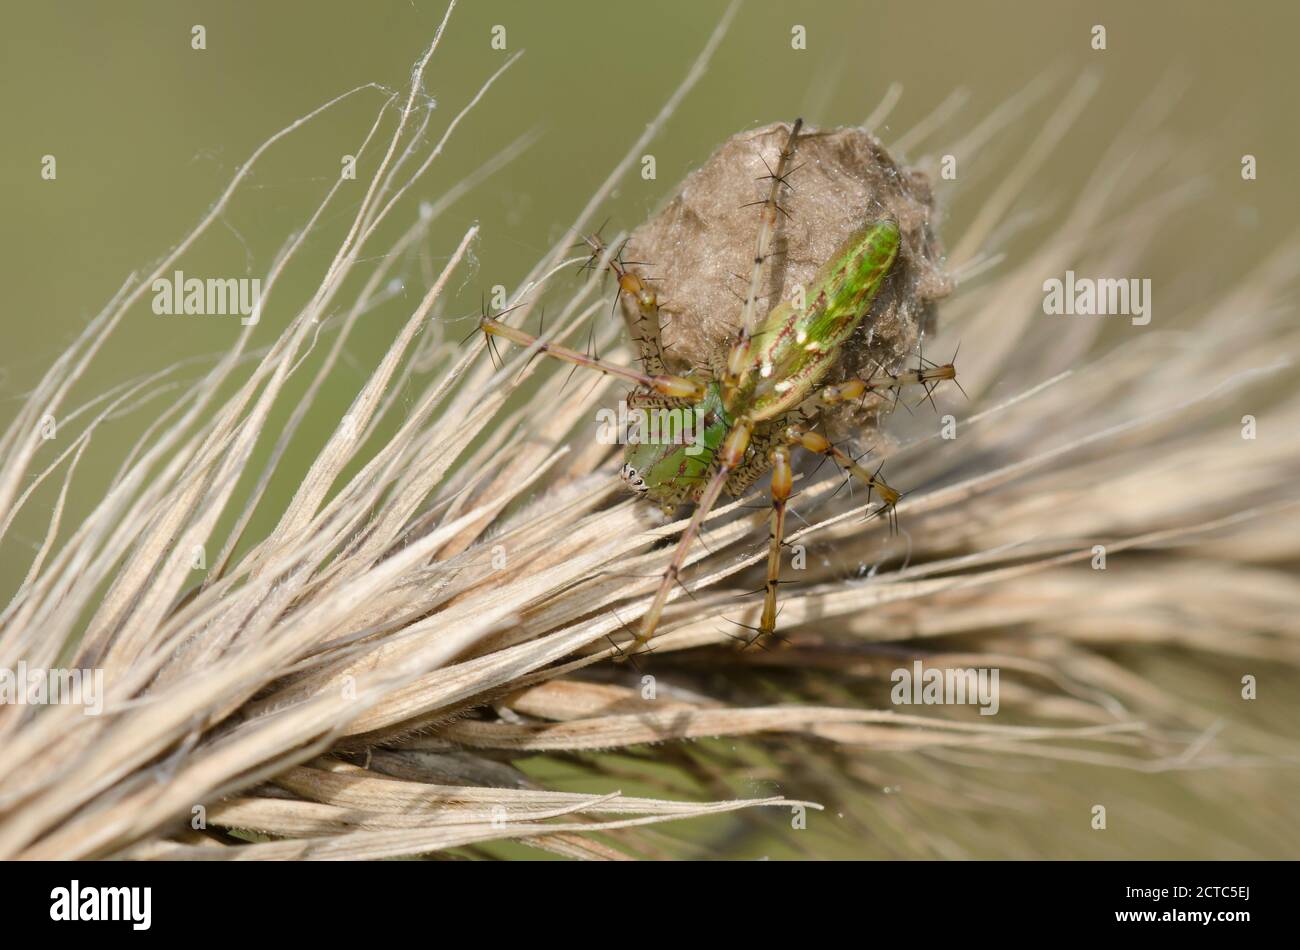 Green Lynx Spider, Peucetia viridans, female guarding egg case while perched on Virginia wildrye, Elymus virginicus,  grasshead Stock Photo